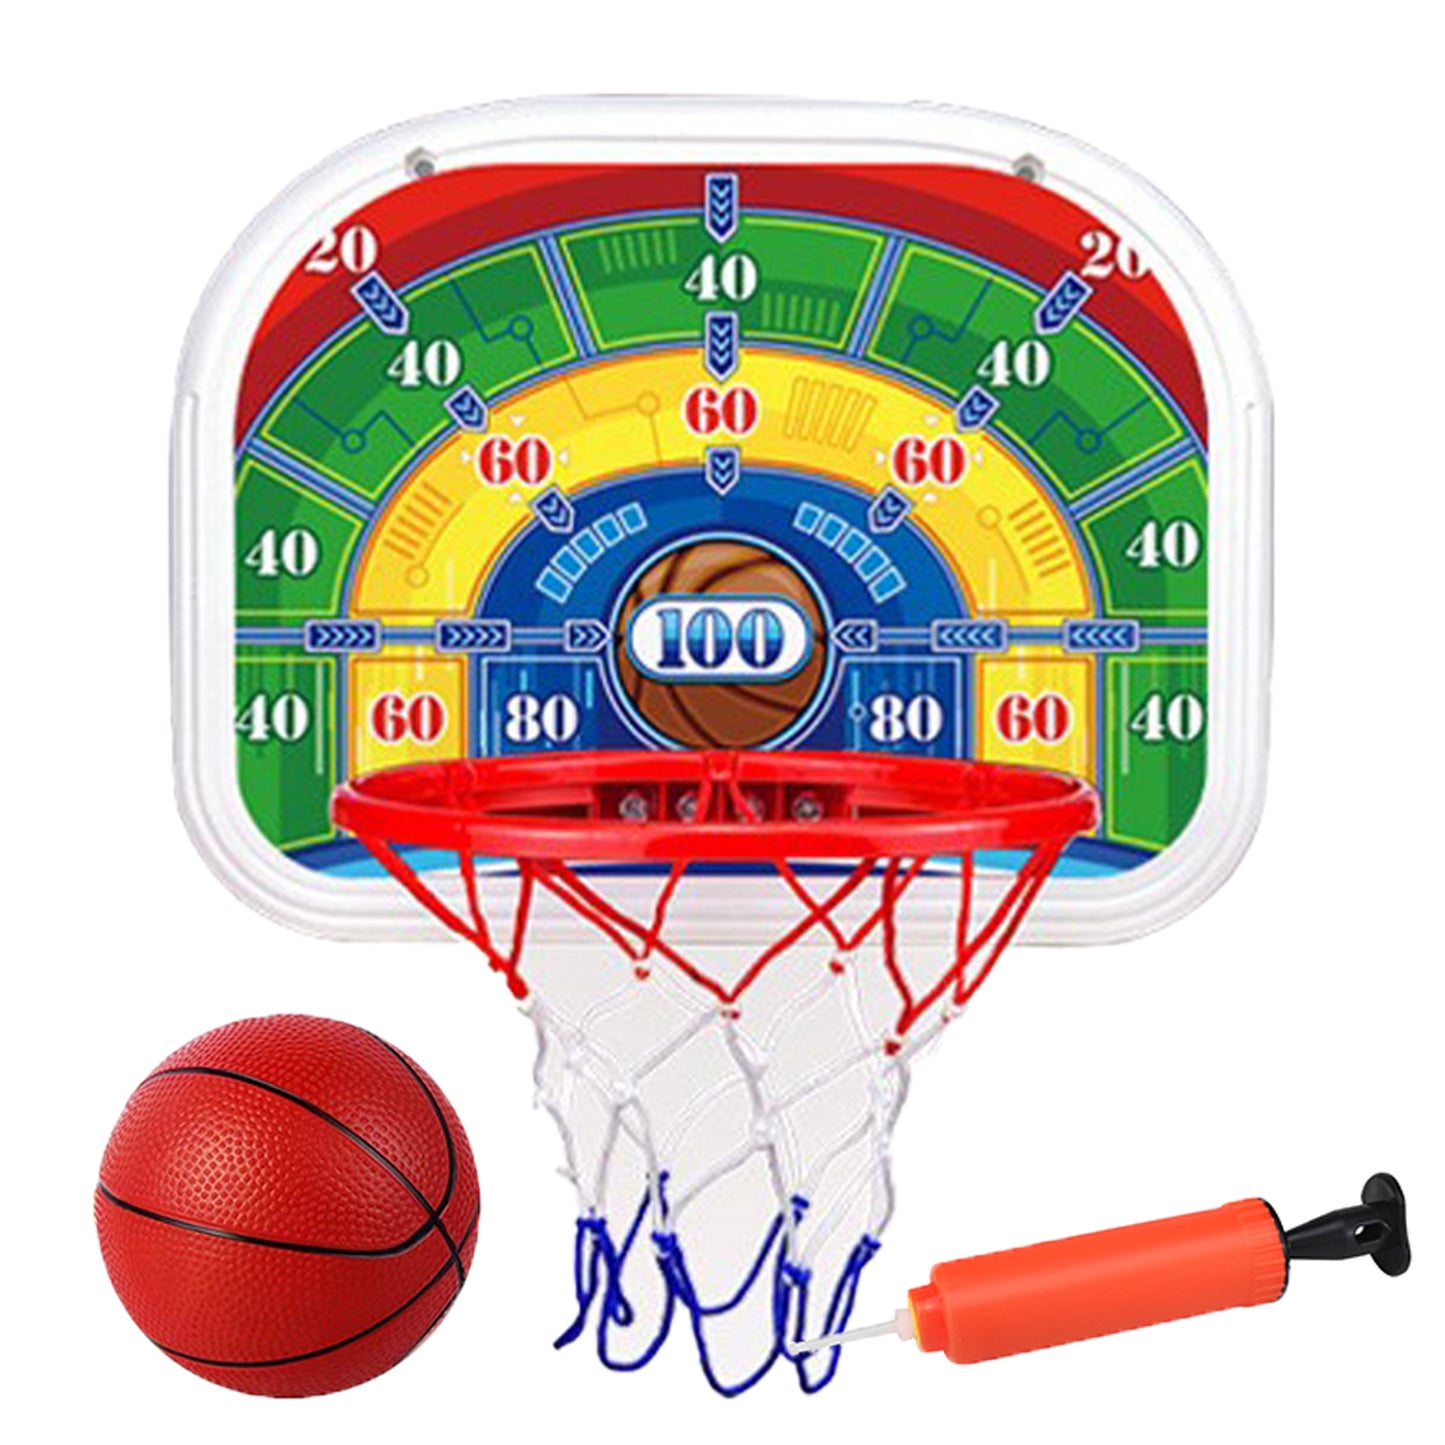 "Mini Basketball Hoop Set for Kids Adults, Indoor Play Basketball Hoop for Door with PVC Basketballs, ABS Backboard Metal Rim Goal Sport Party Gifts for Pool Game Fun "